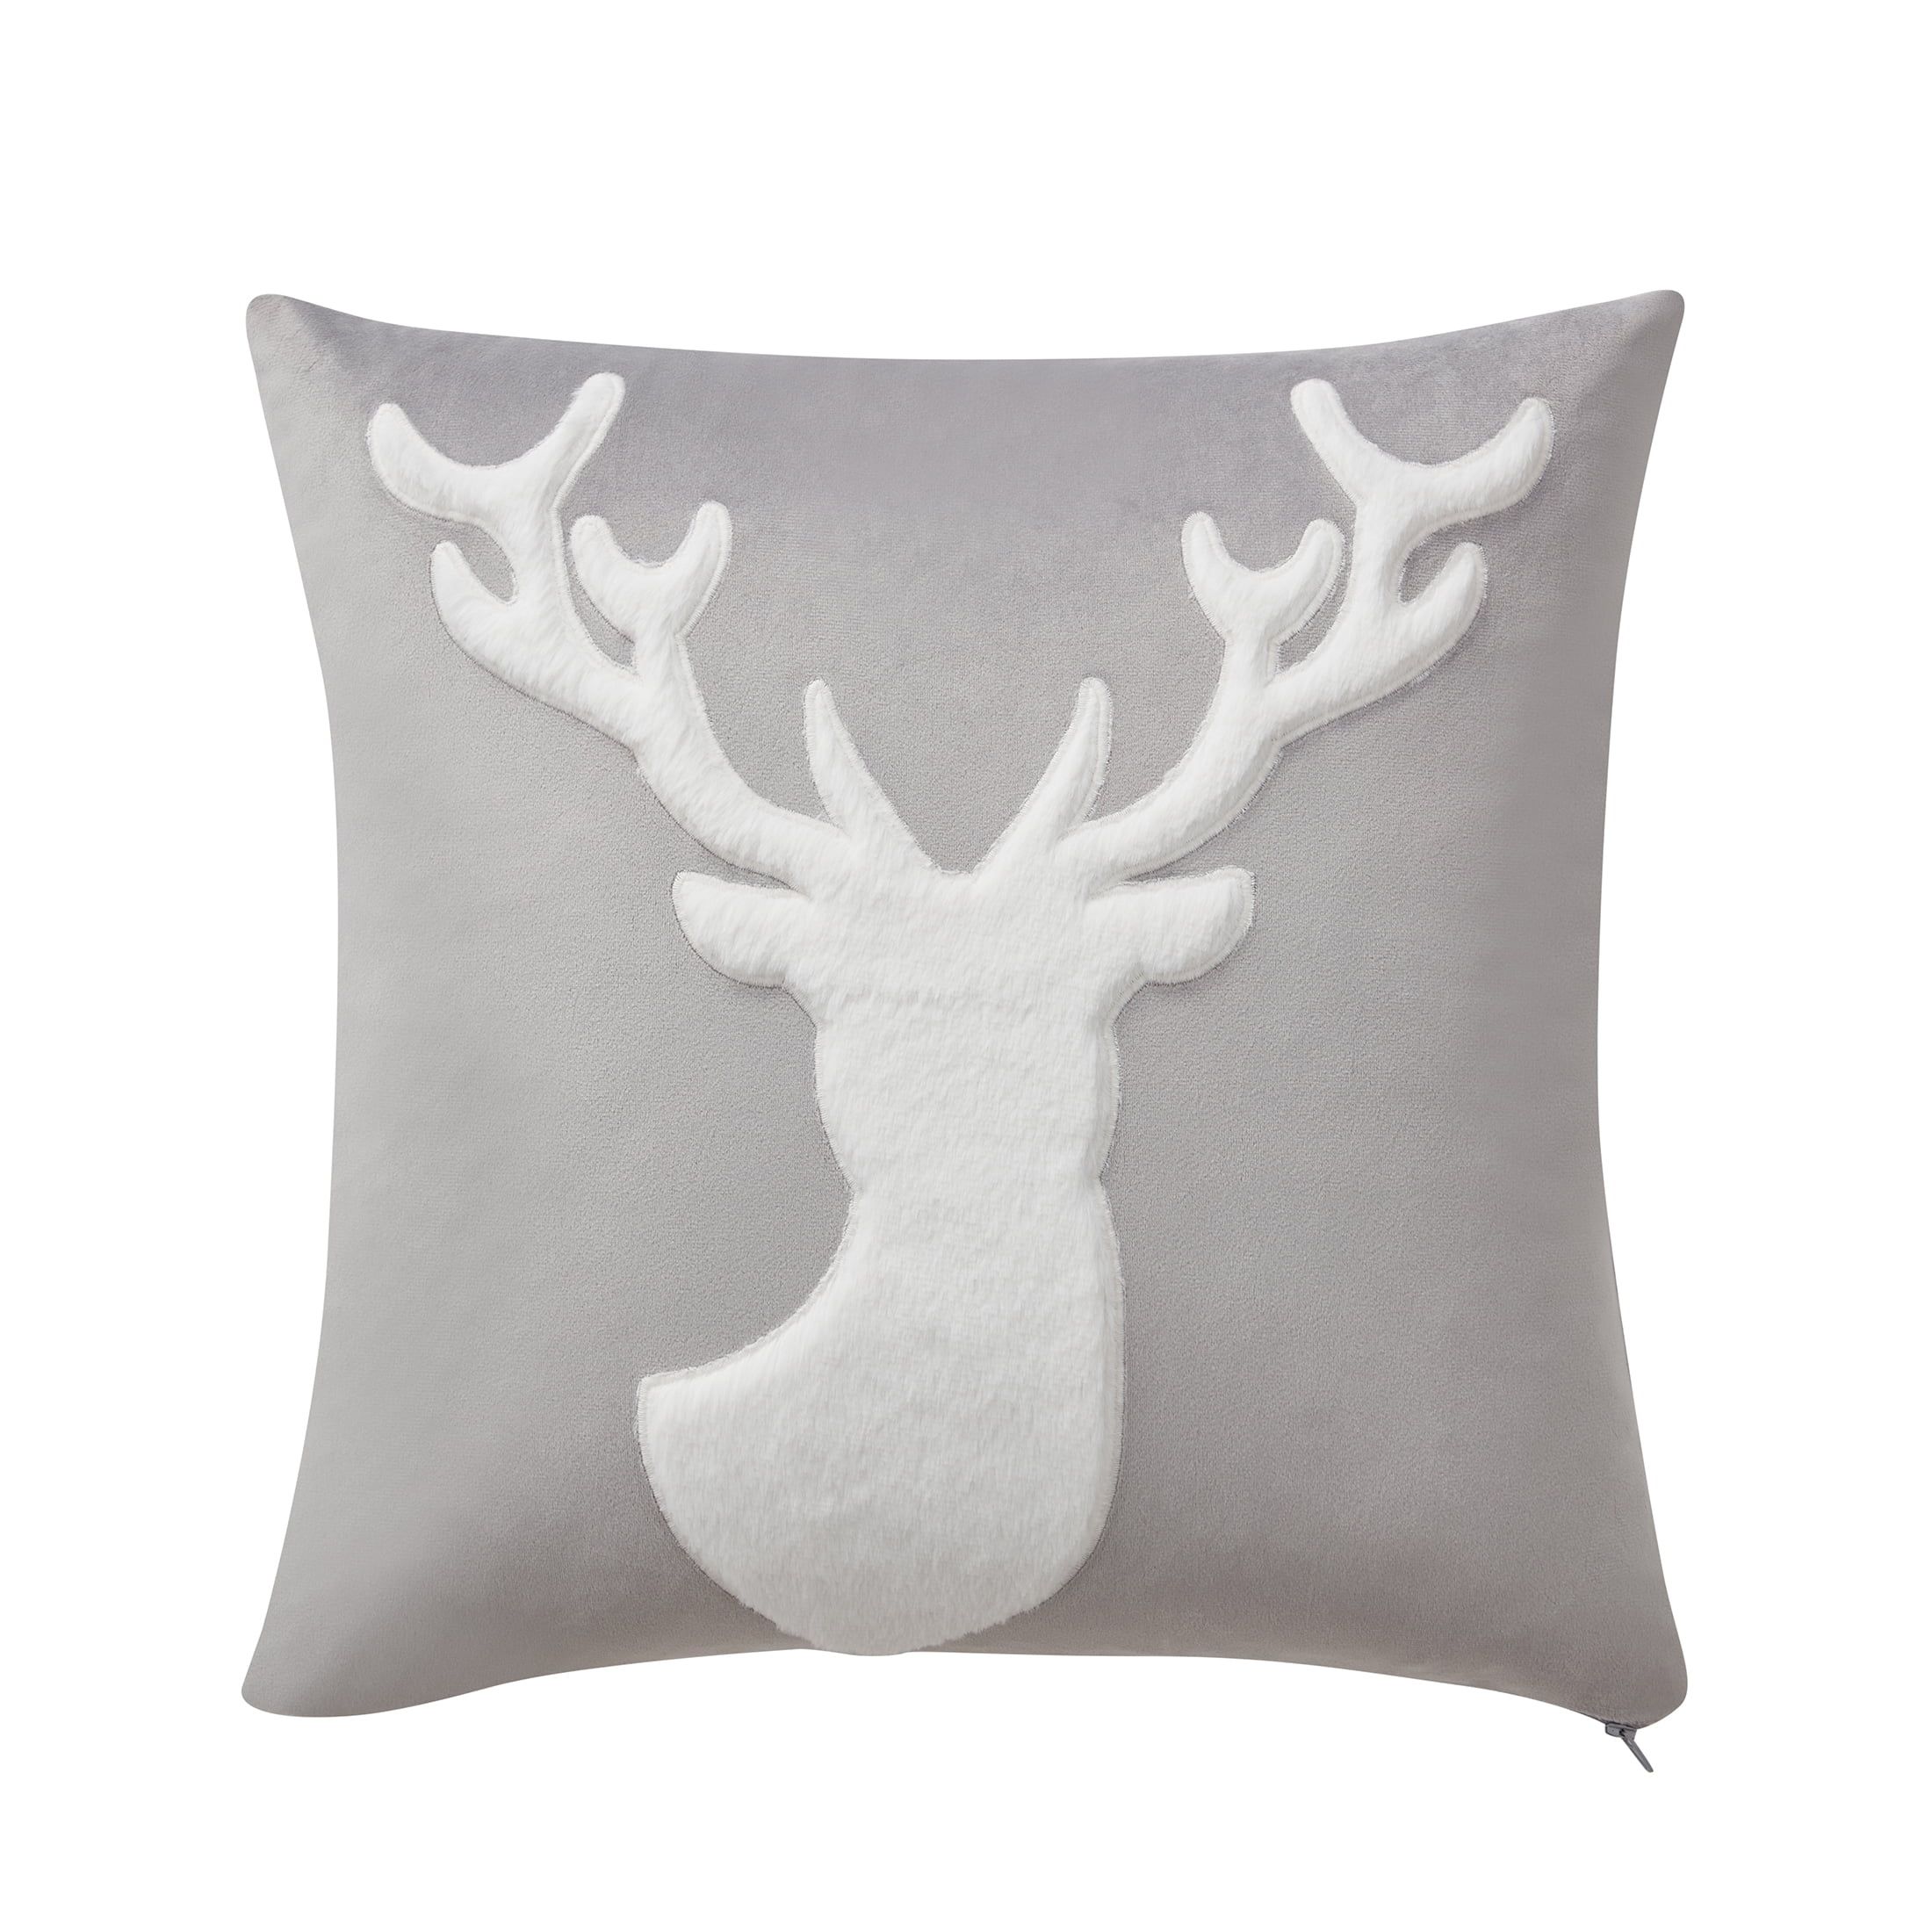 My Texas House Holiday Reindeer Square Decorative Pillow Cover, 18" x 18", Multi | Walmart (US)